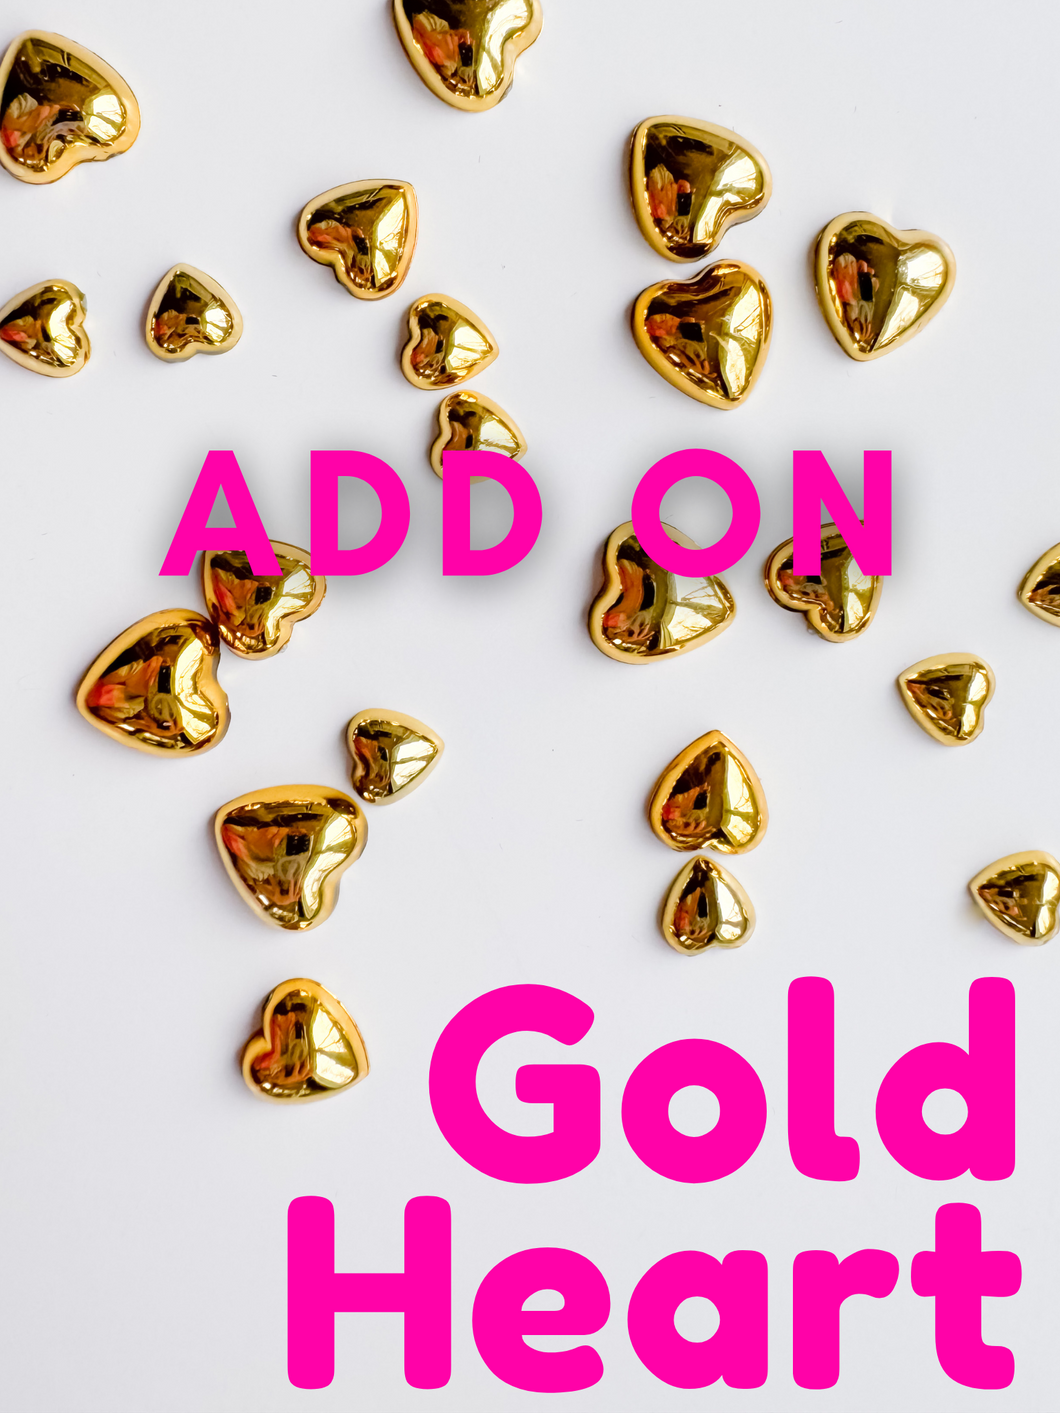 Gold Heart ADD-ON